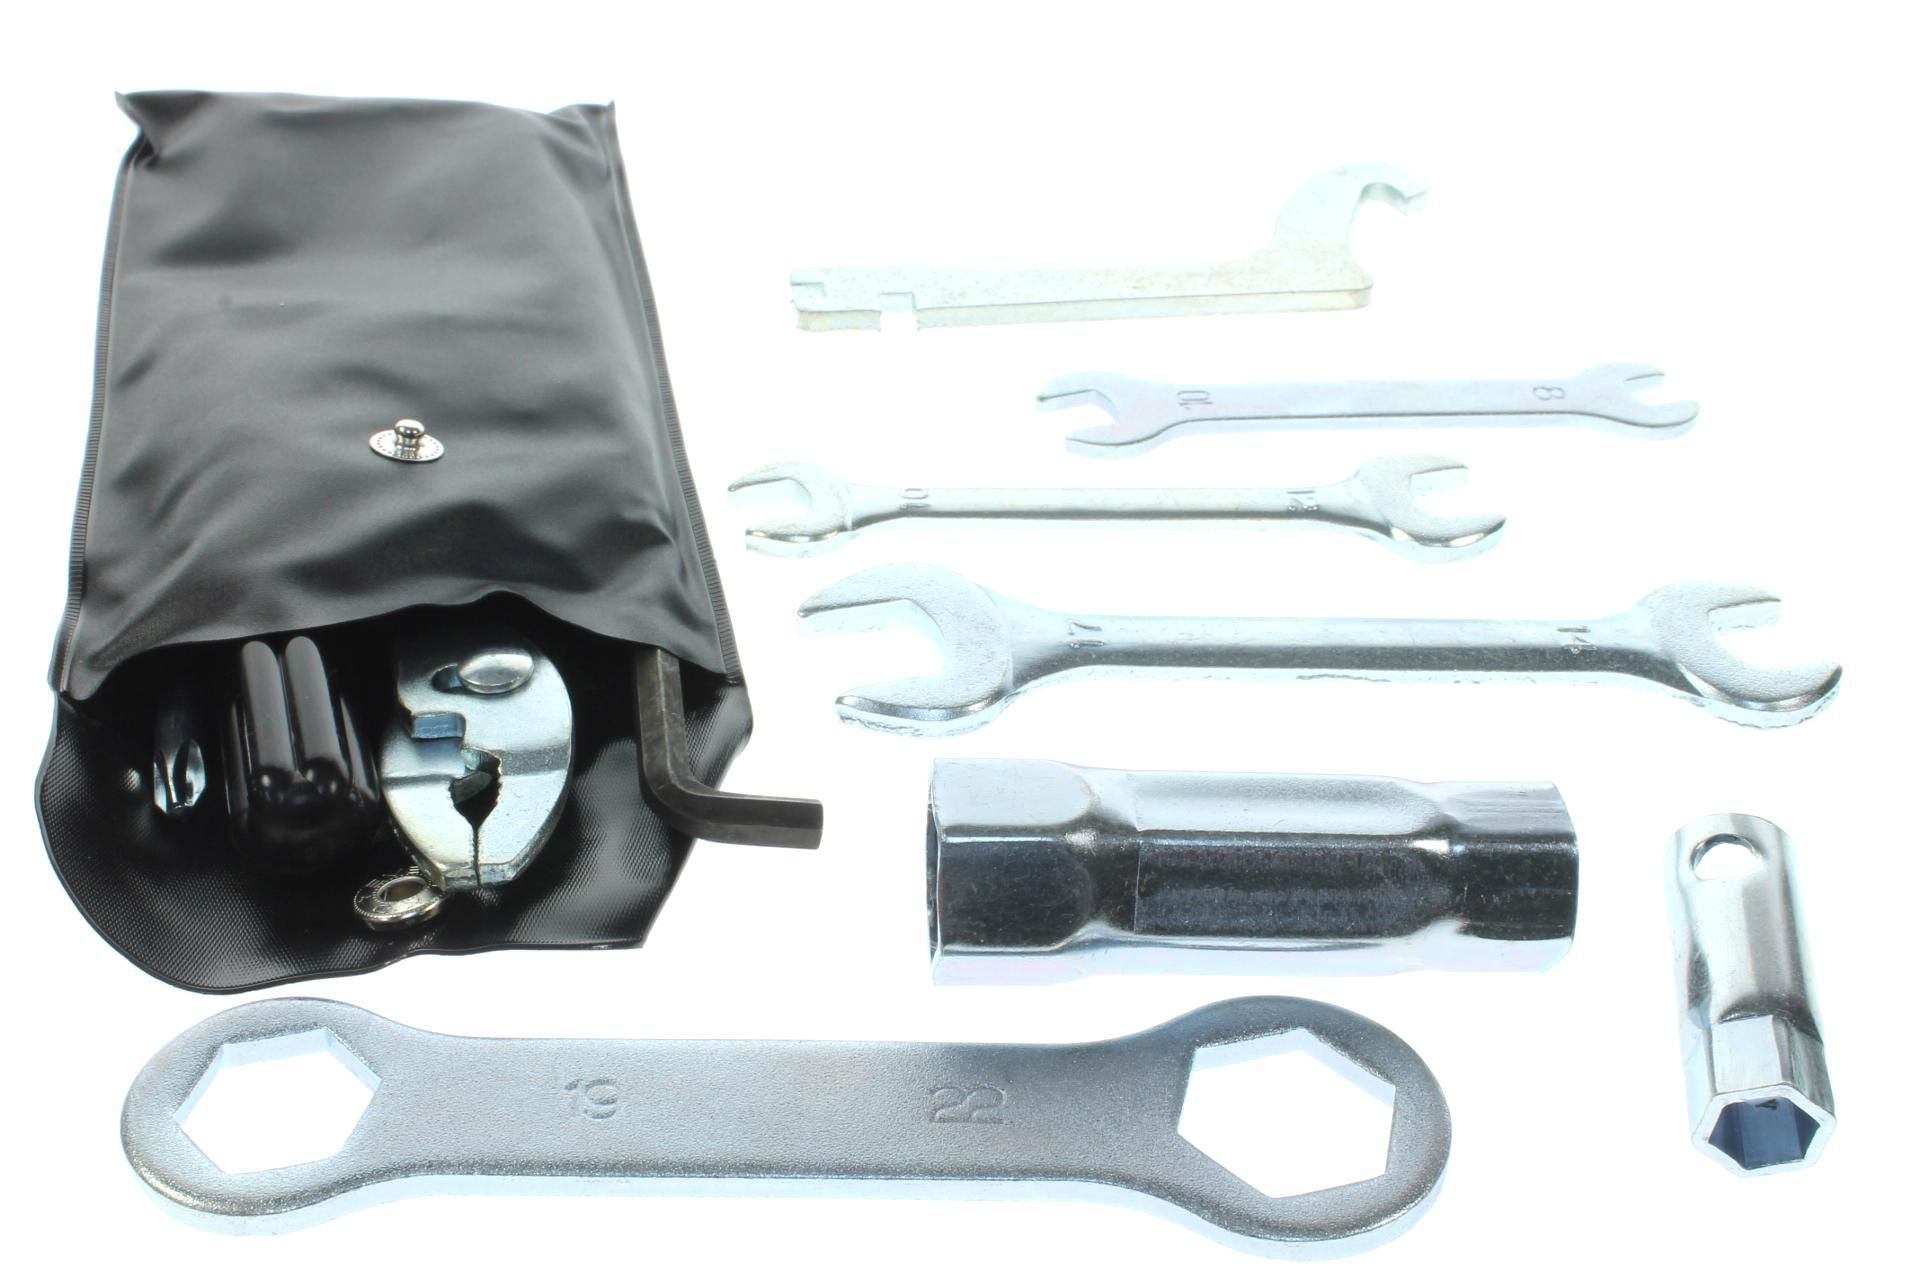 3M2-28100-00-00 Superseded by 2A6-W2810-00-00 - TOOL KIT